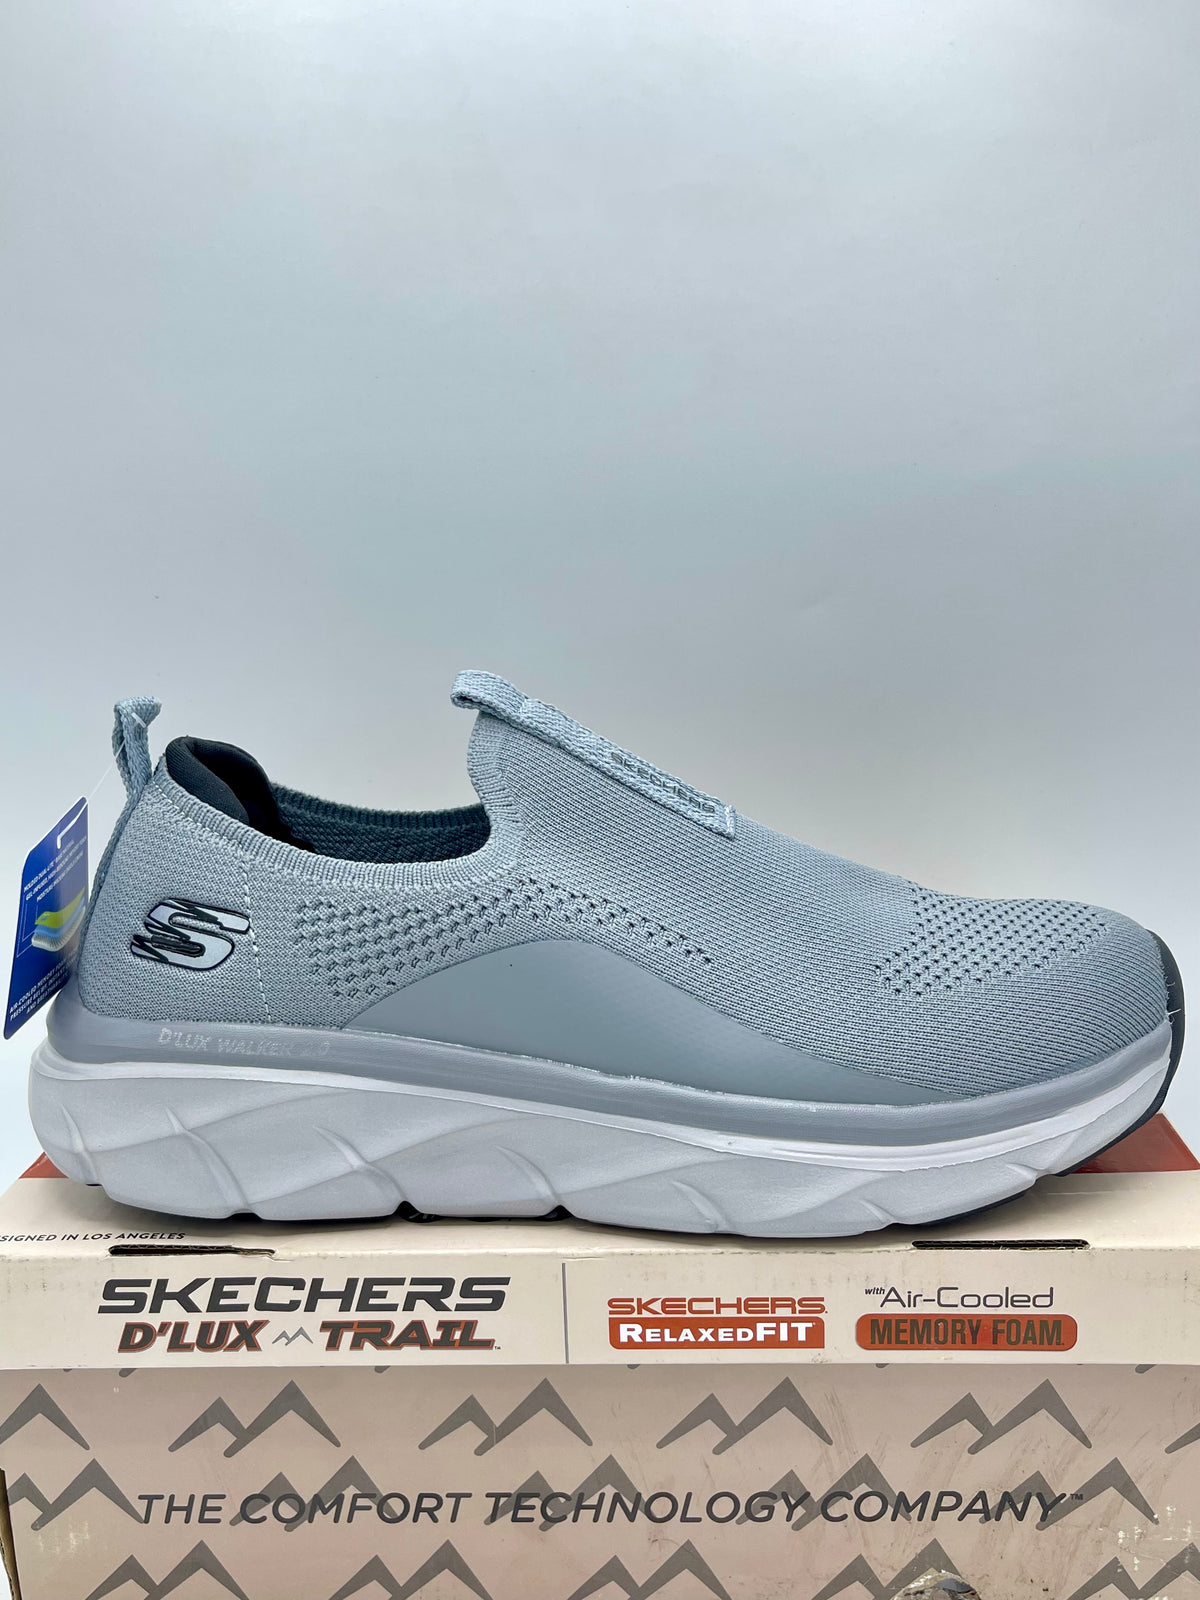 Skechers lots stock all sizes available